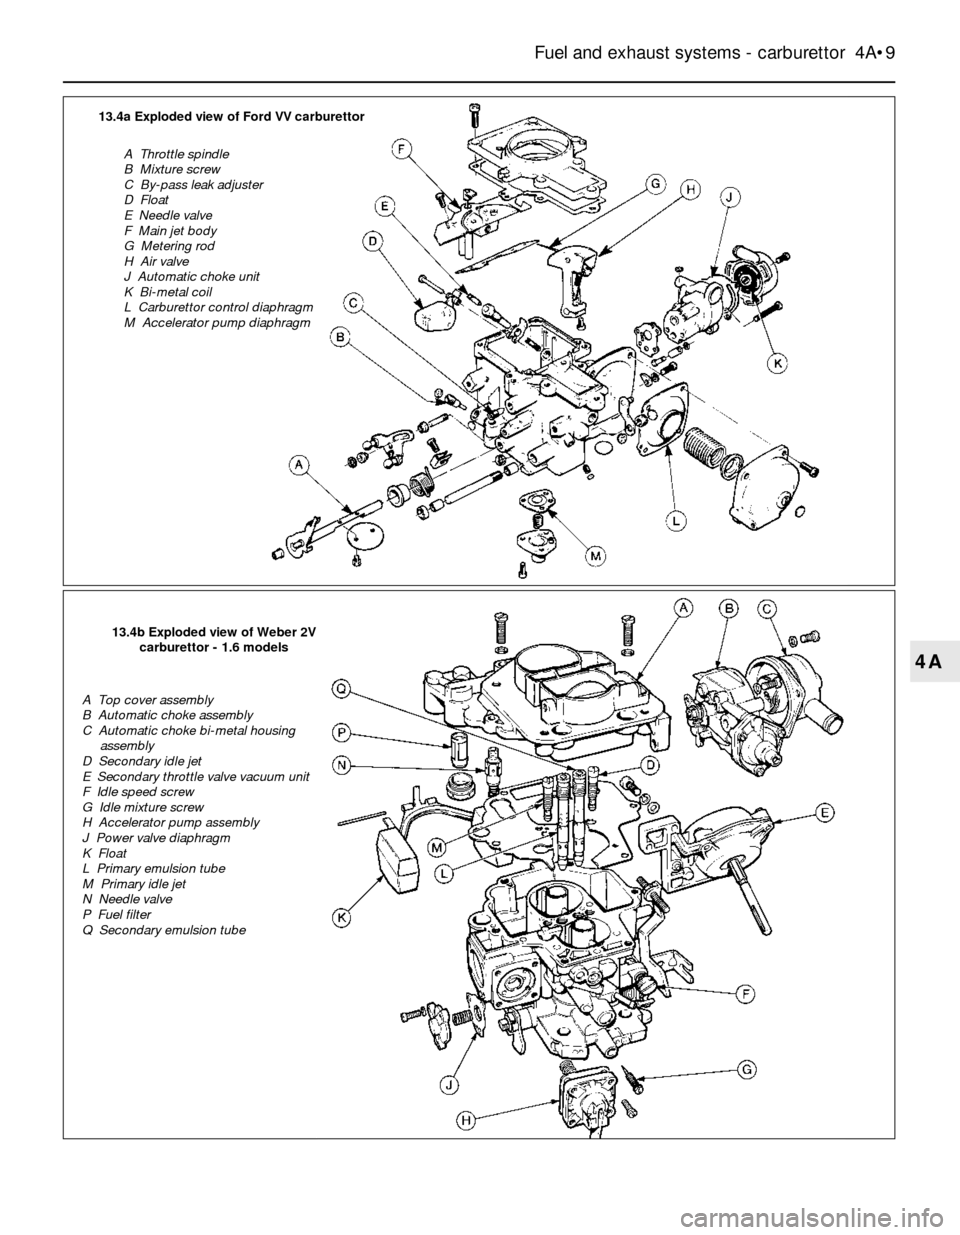 FORD SIERRA 1989 2.G Fuel And Exhaust Systems Carburettor Workshop Manual Fuel and exhaust systems - carburettor  4A•9
4A
13.4a Exploded view of Ford VV carburettor
A  Throttle spindle
B  Mixture screw
C  By-pass leak adjuster
D  Float
E  Needle valve
F  Main jet body
G  